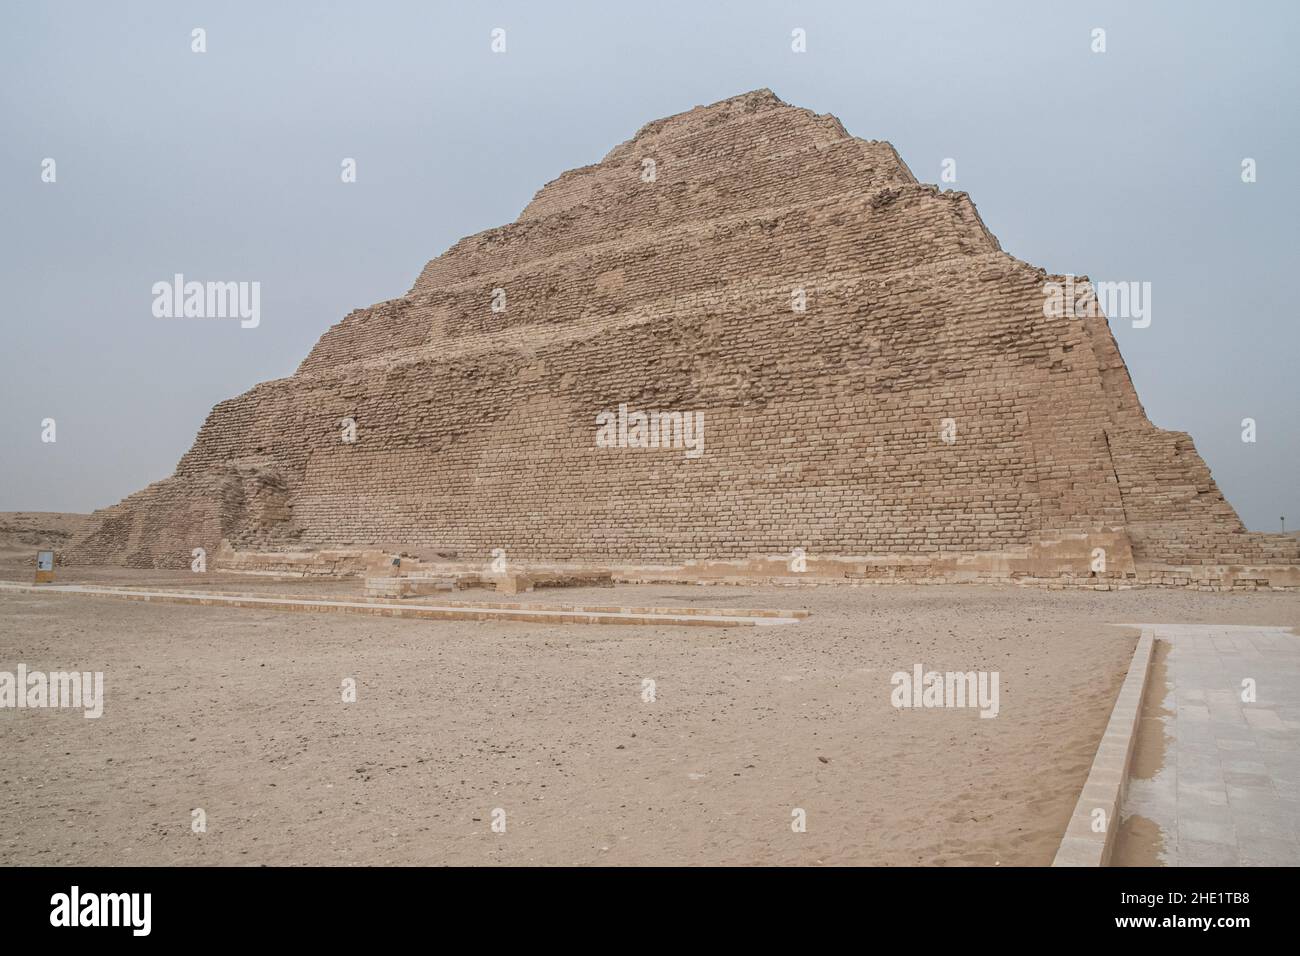 The step pyramid of Djoser in Saqqara, Egypt considered the oldest stone building worldwide. Stock Photo